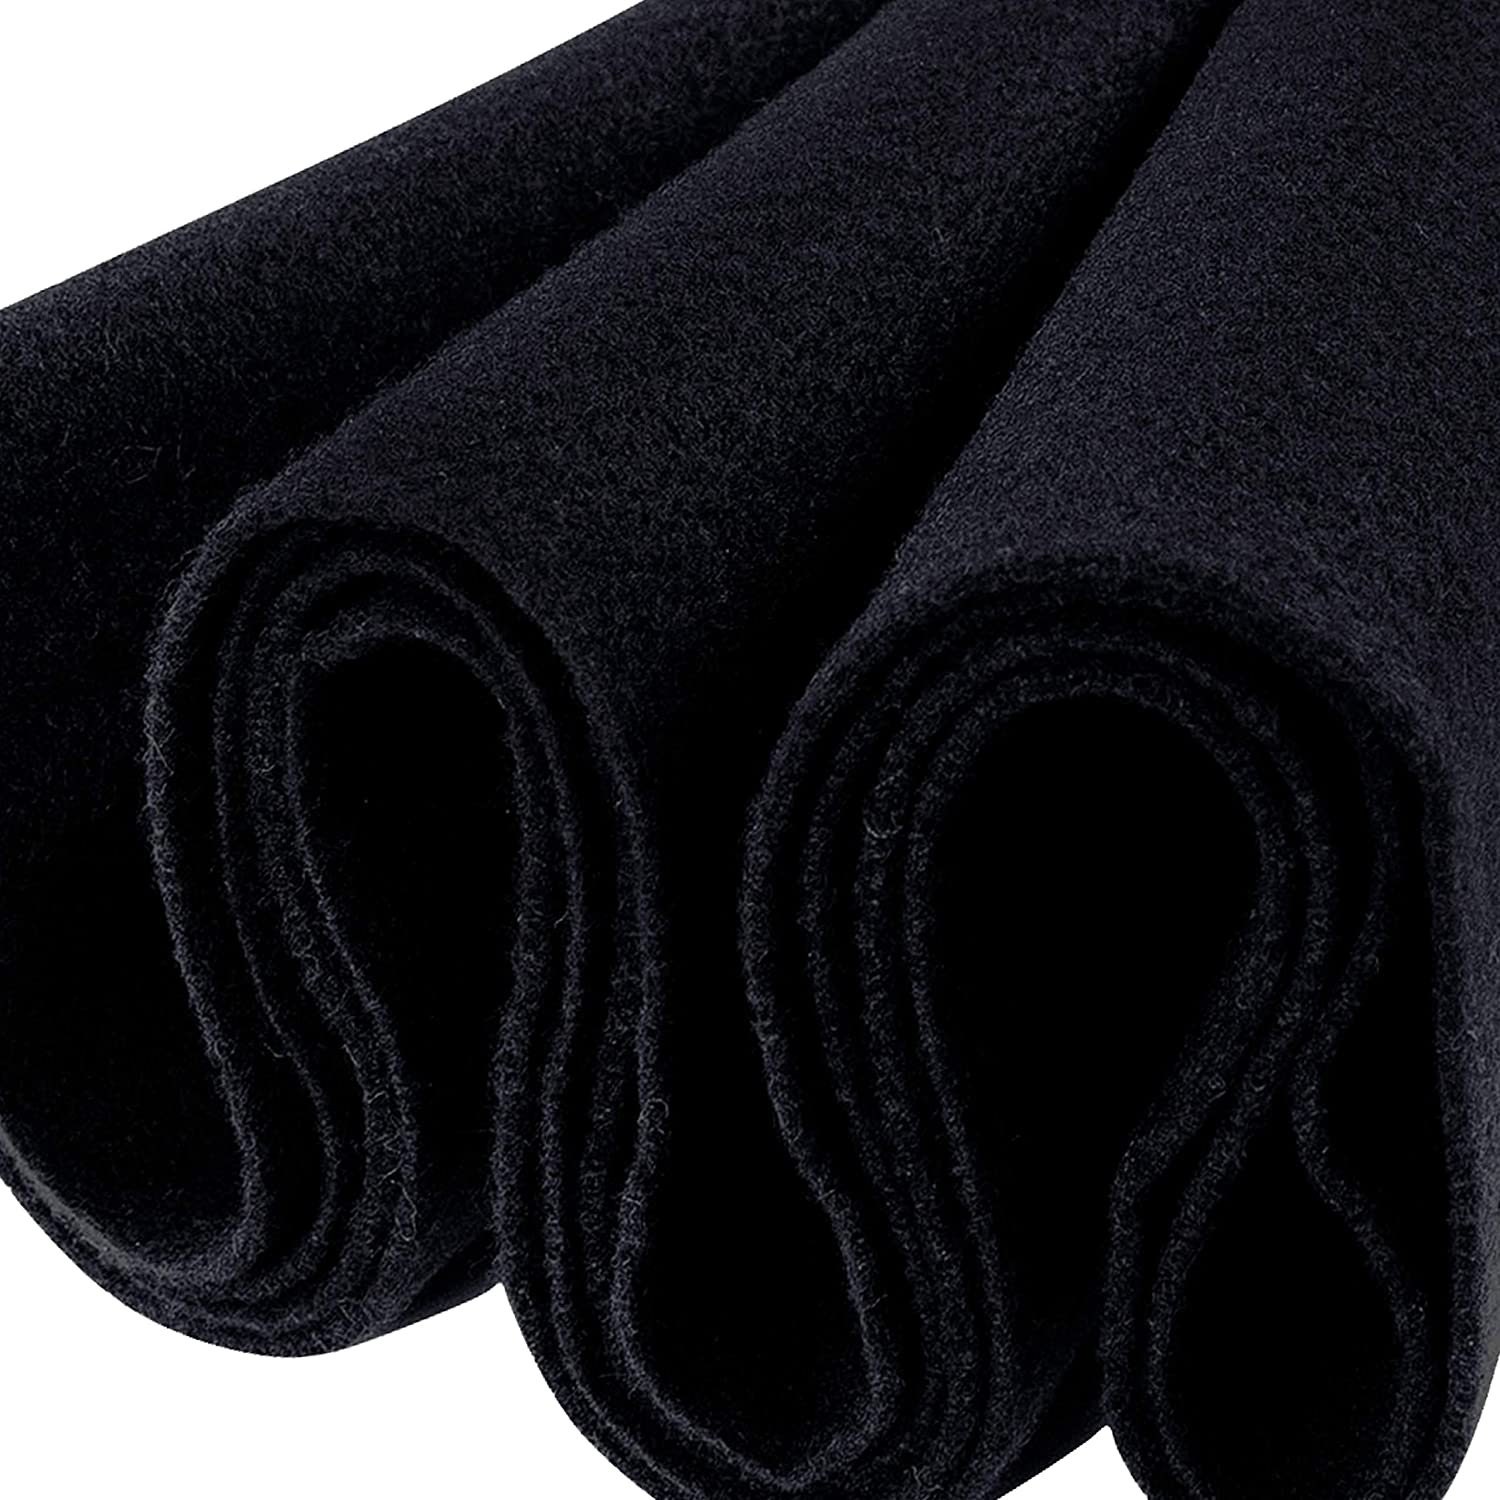 Black Felt Fabric Soft Texture for Craft Projects, Sewing, Padding DIY 